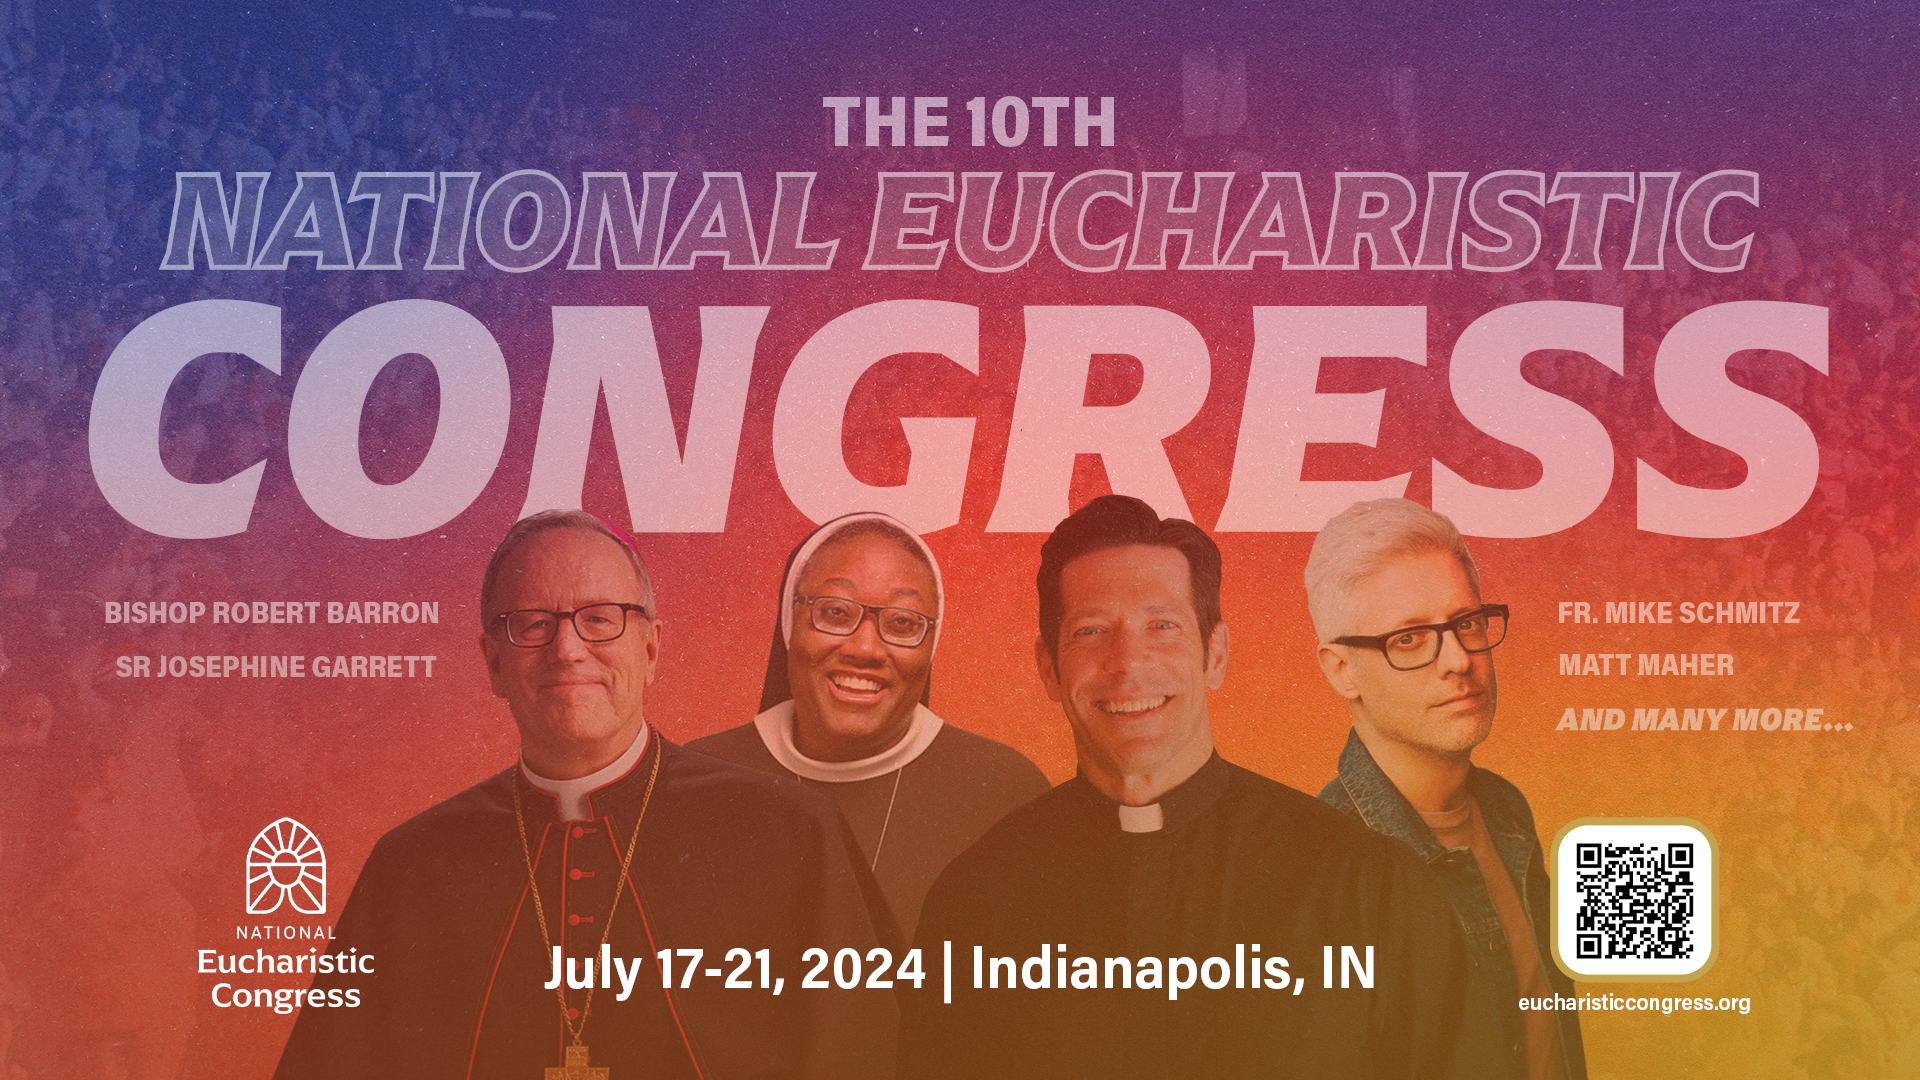 THE 10TH NATIONAL EUCHARISTIC CONGRESS - JULY 17 - 21, 2024